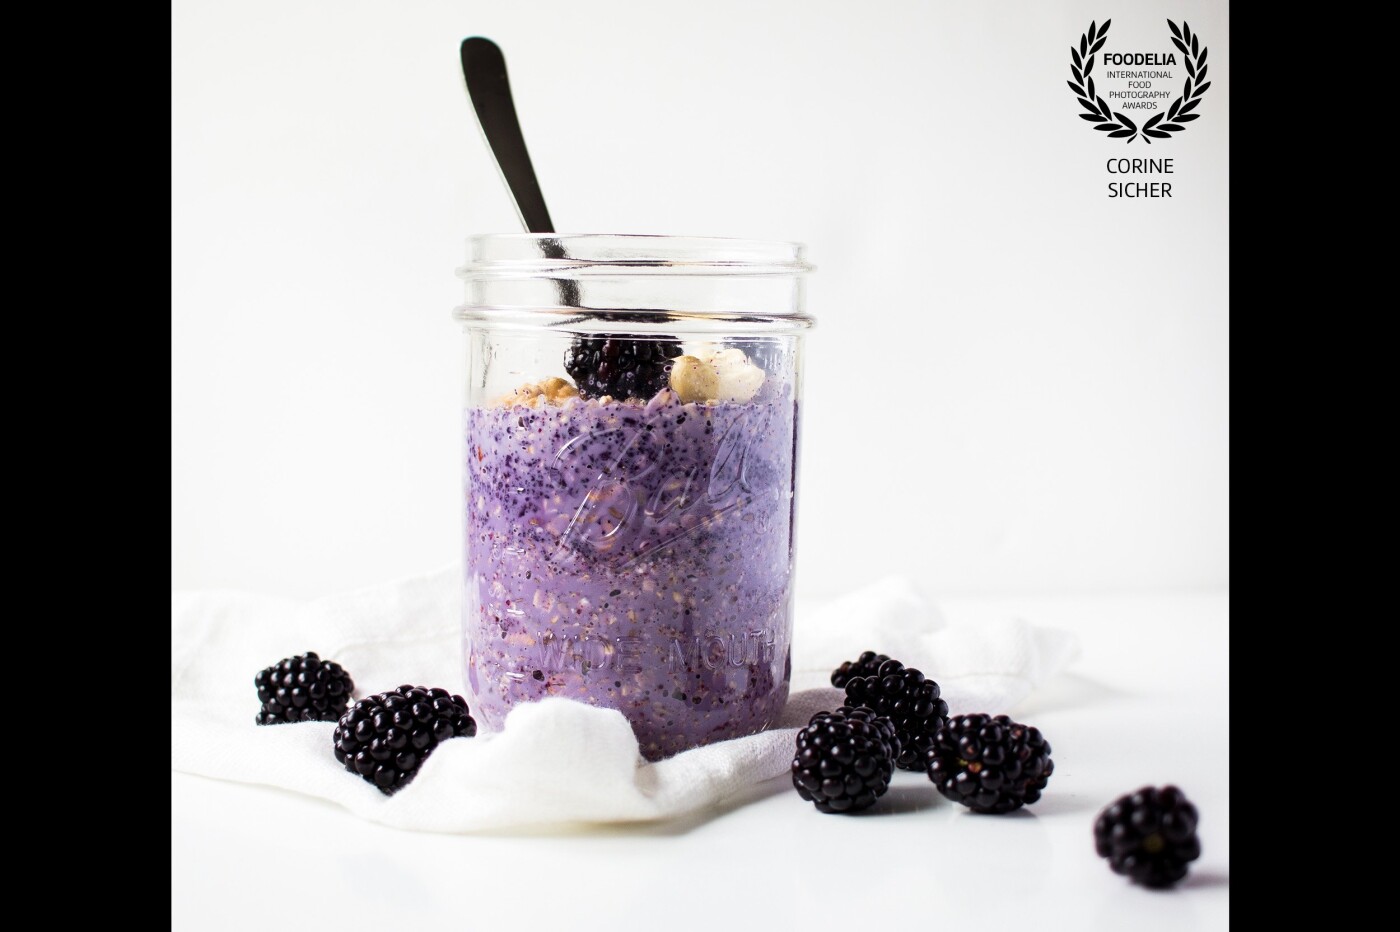 Overnight oats with blackberry and buttermilk. I love my colored oats - mixed with blackberry-fruit-powder and fresh berries. Shot this beautiful jar with natural light, reflection on the left and behind. Best came afterward, eat it all up by myself. 